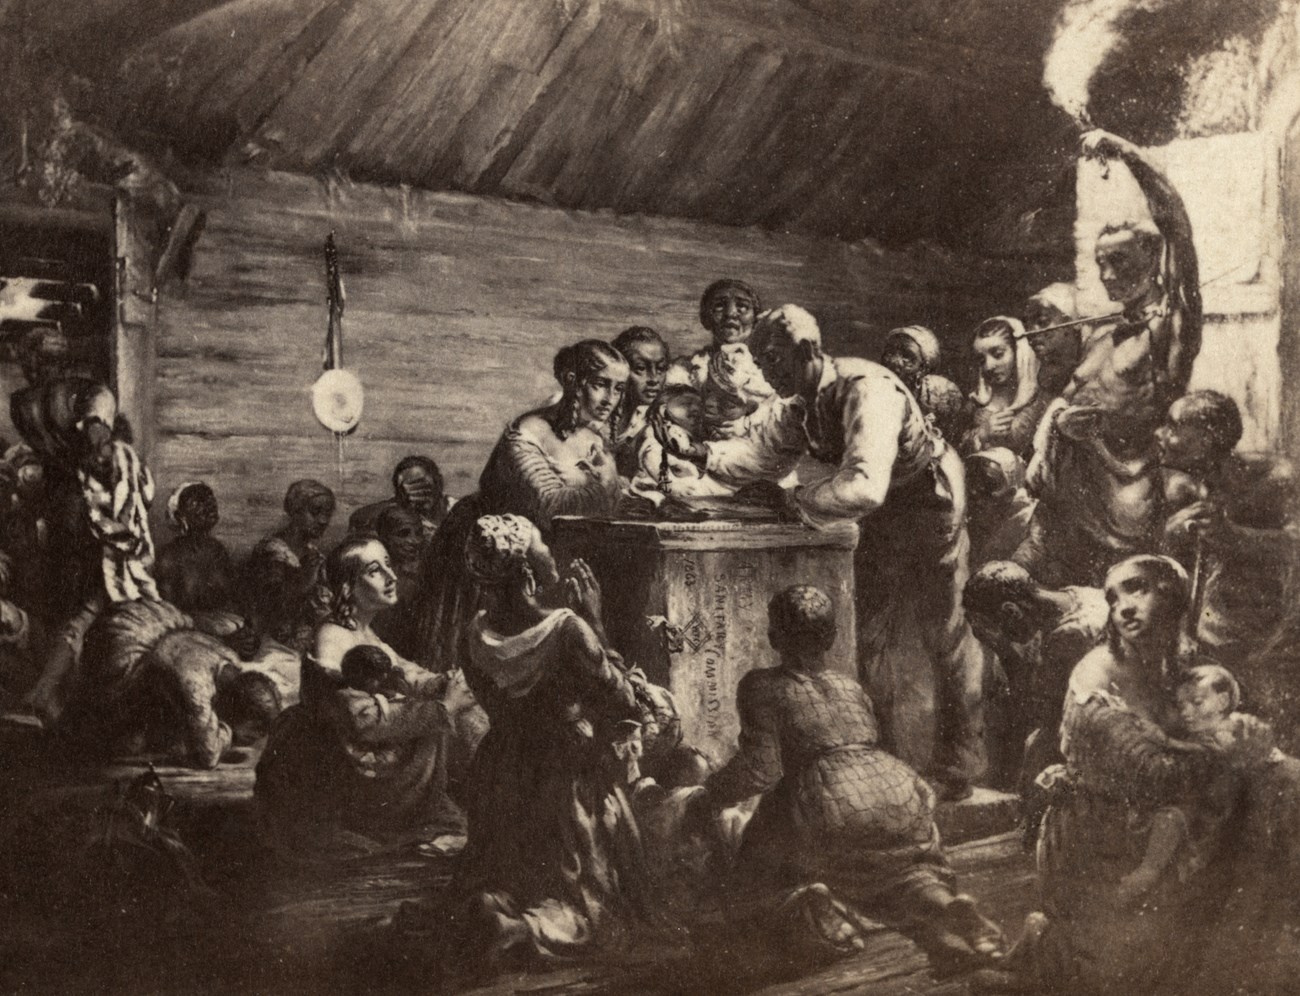 A printed illustration of a huddled group of Black Americans in a small room with candlelight.